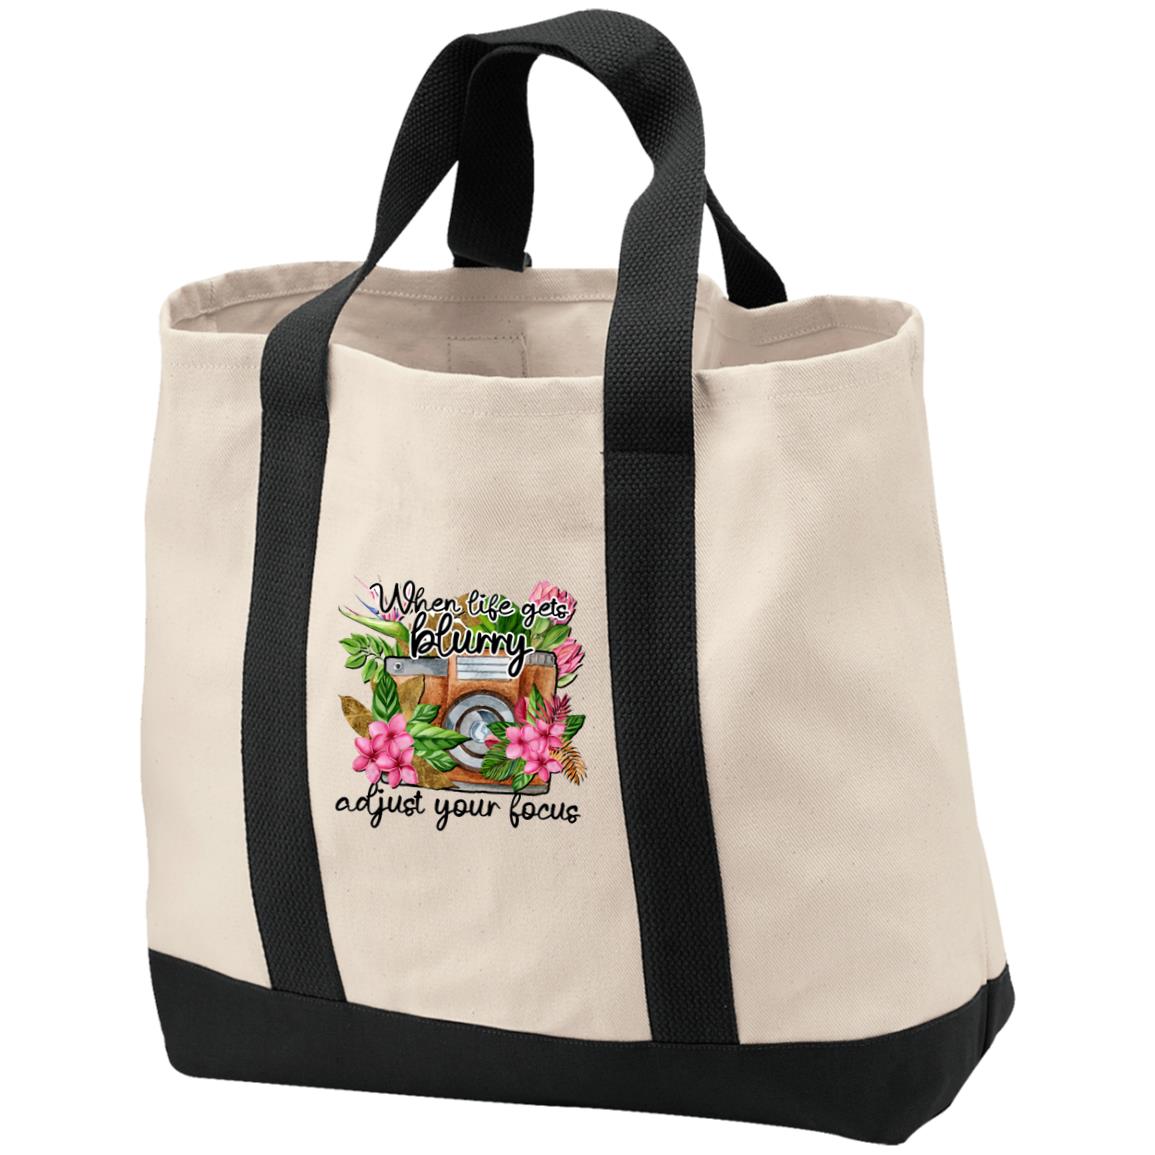 When Life is Blurry Adjust Your Focus cloth tote shopping bag